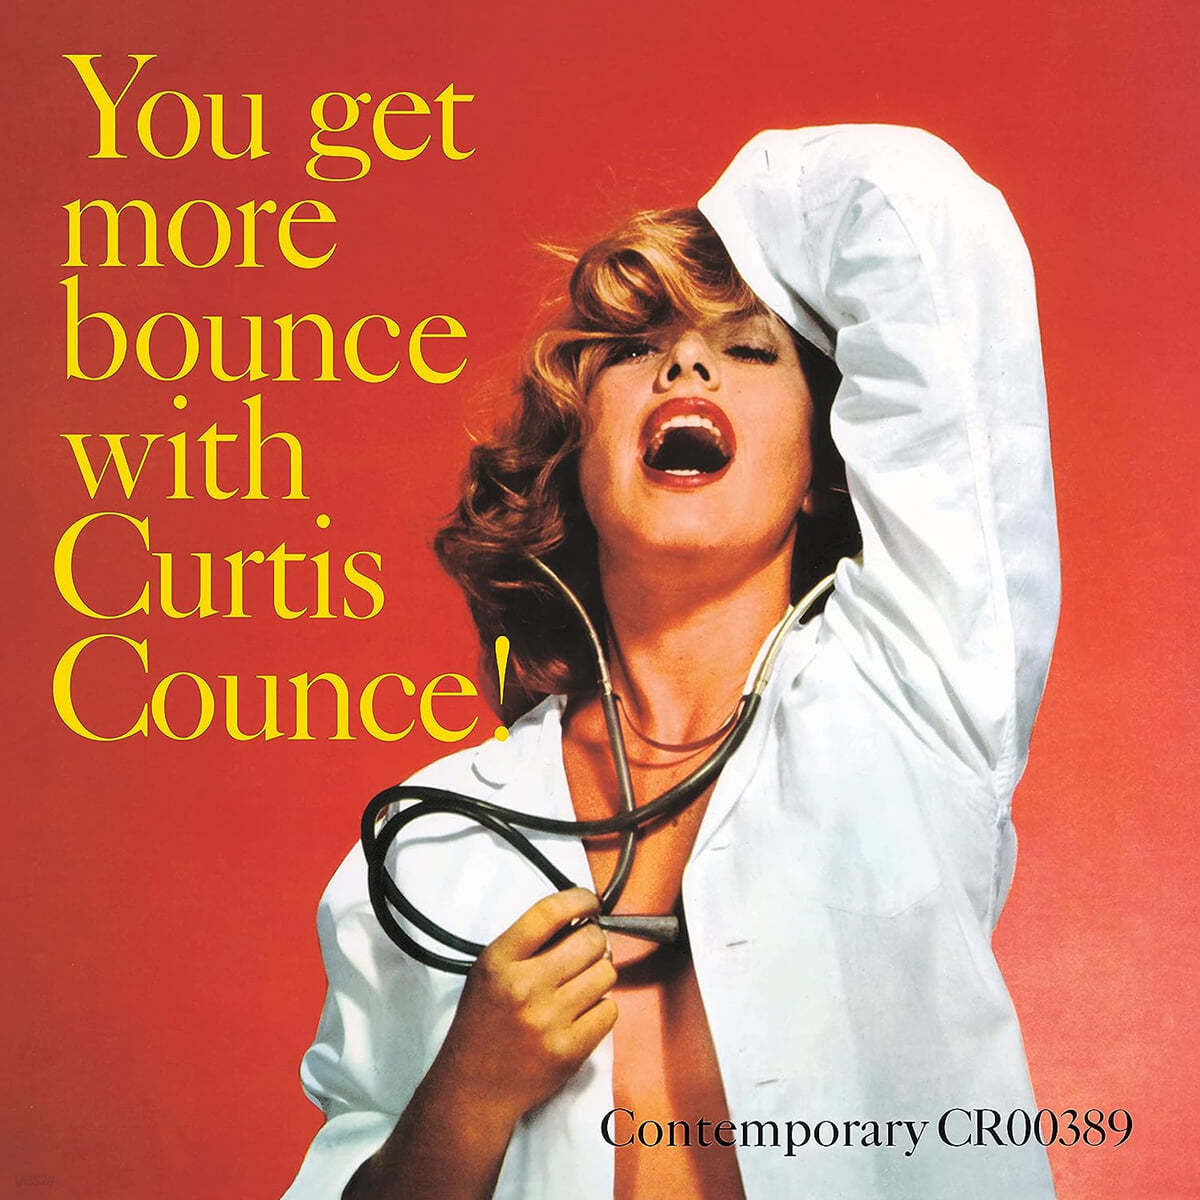 Curtis Counce (커티스 카운스) - You Get More Bounce with Curtis Counce! [LP]